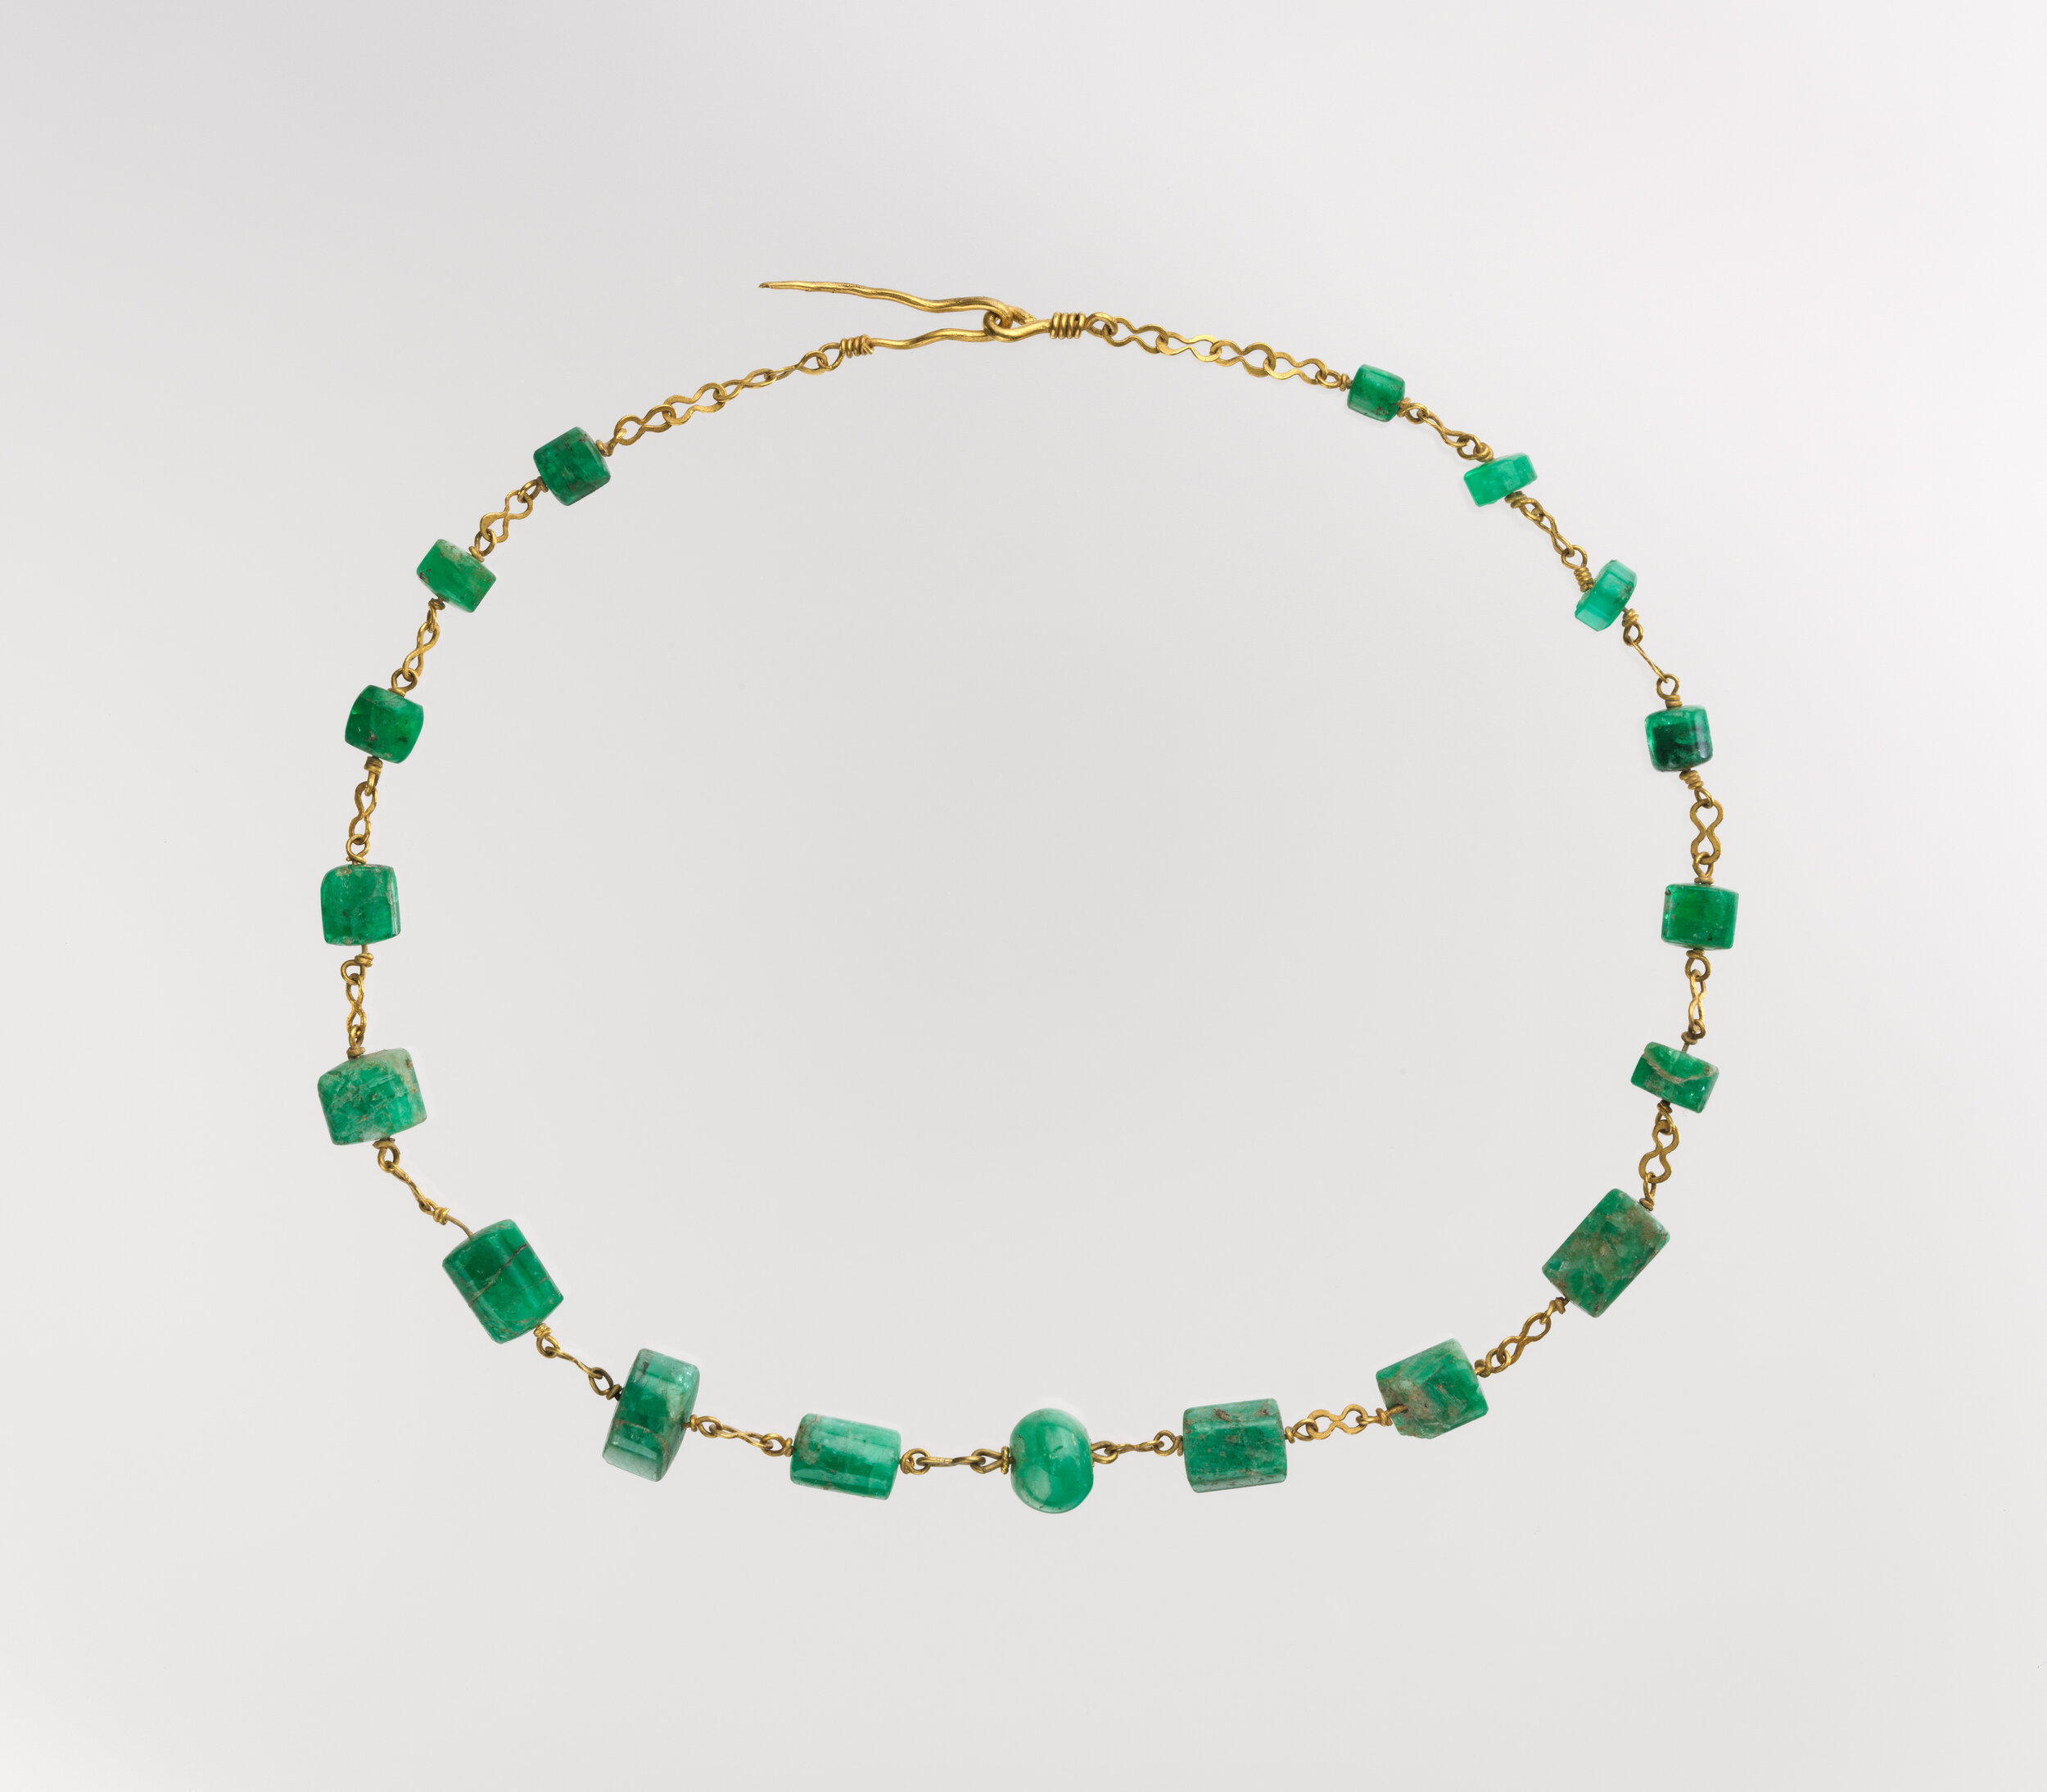 1st to 2nd century A beautiful 1st to 2nd century Roman necklace, courtesy of the MET .